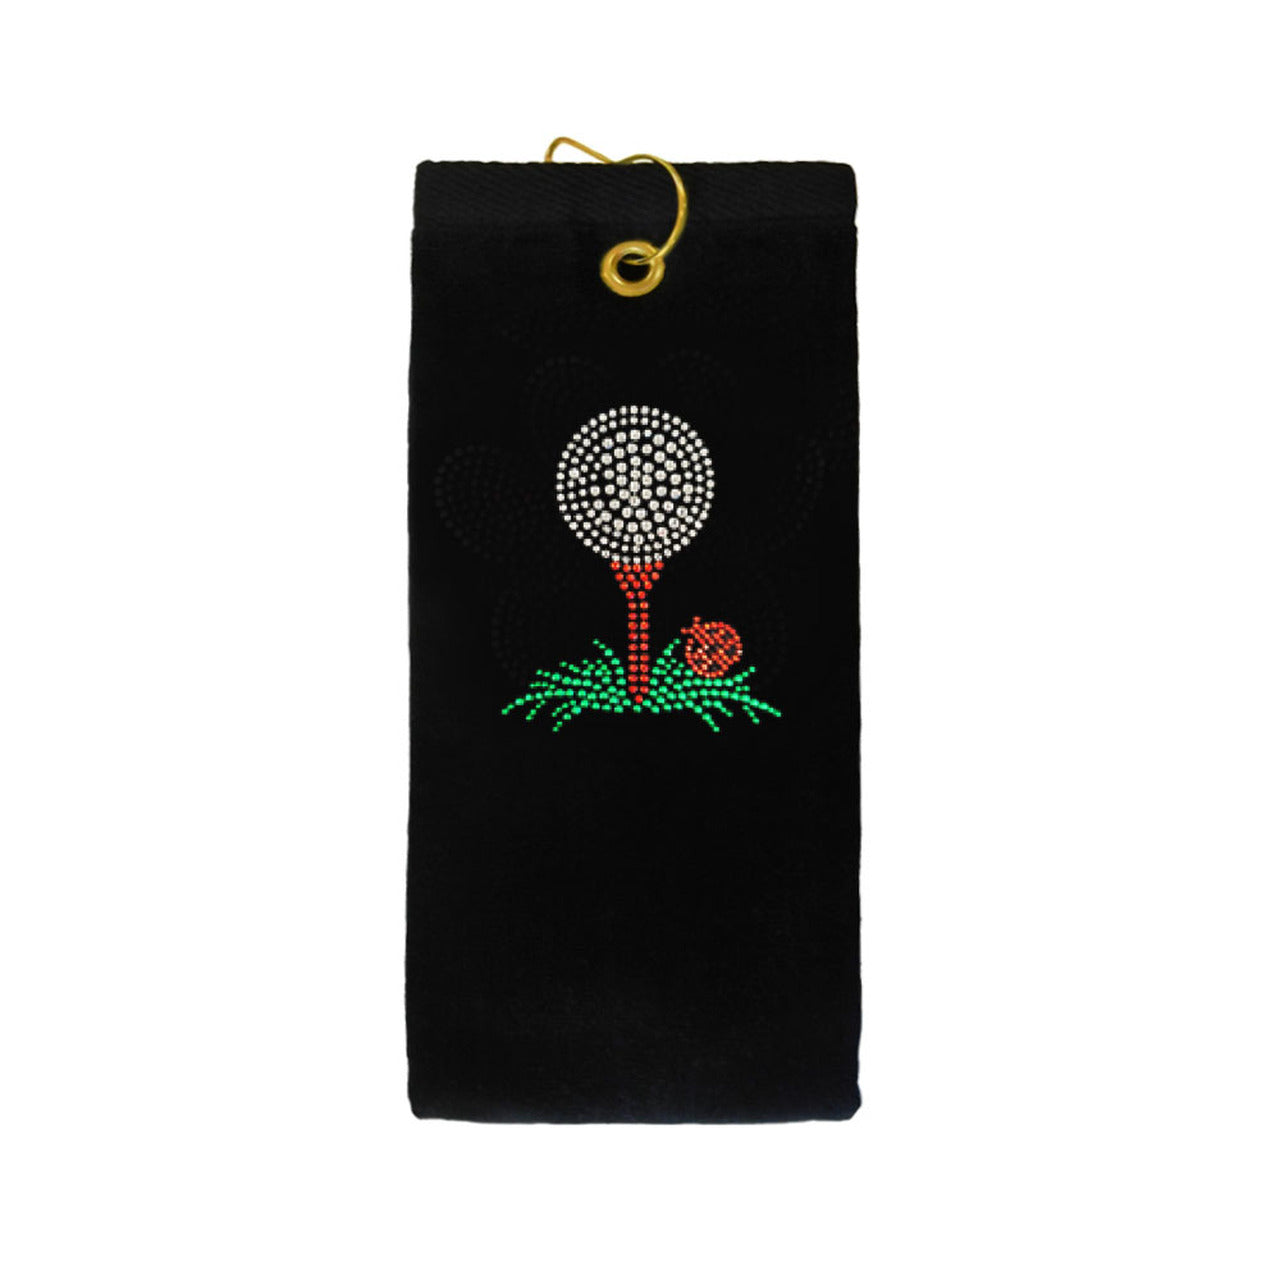 Navika- Golf Towels (Many Designs Available)